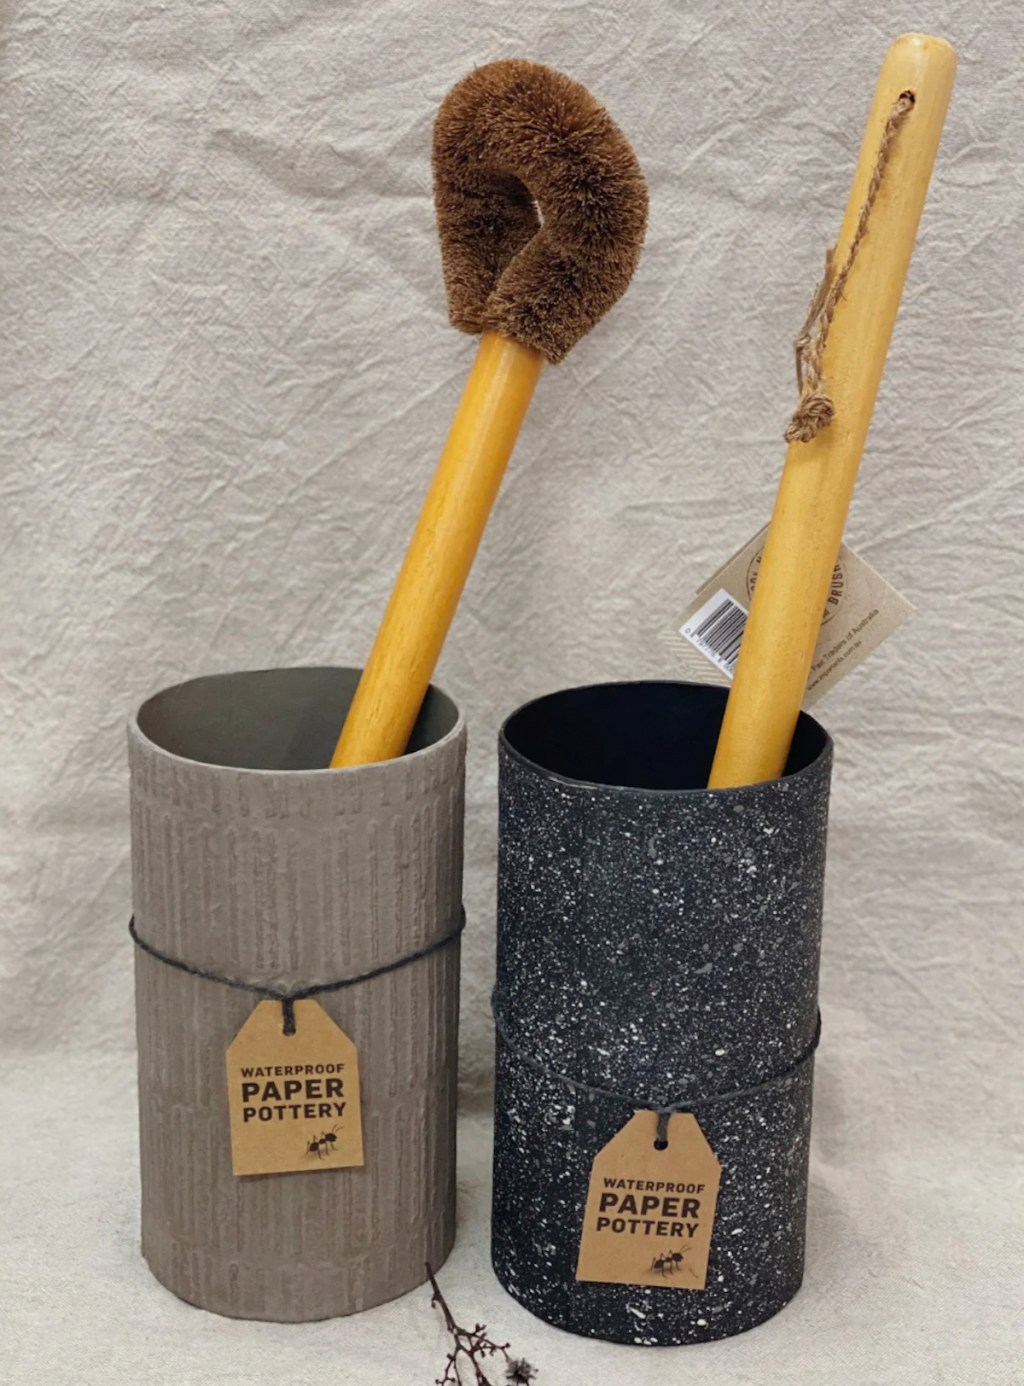 two paper pottery toilet bowl cleaners with wood handle brushes